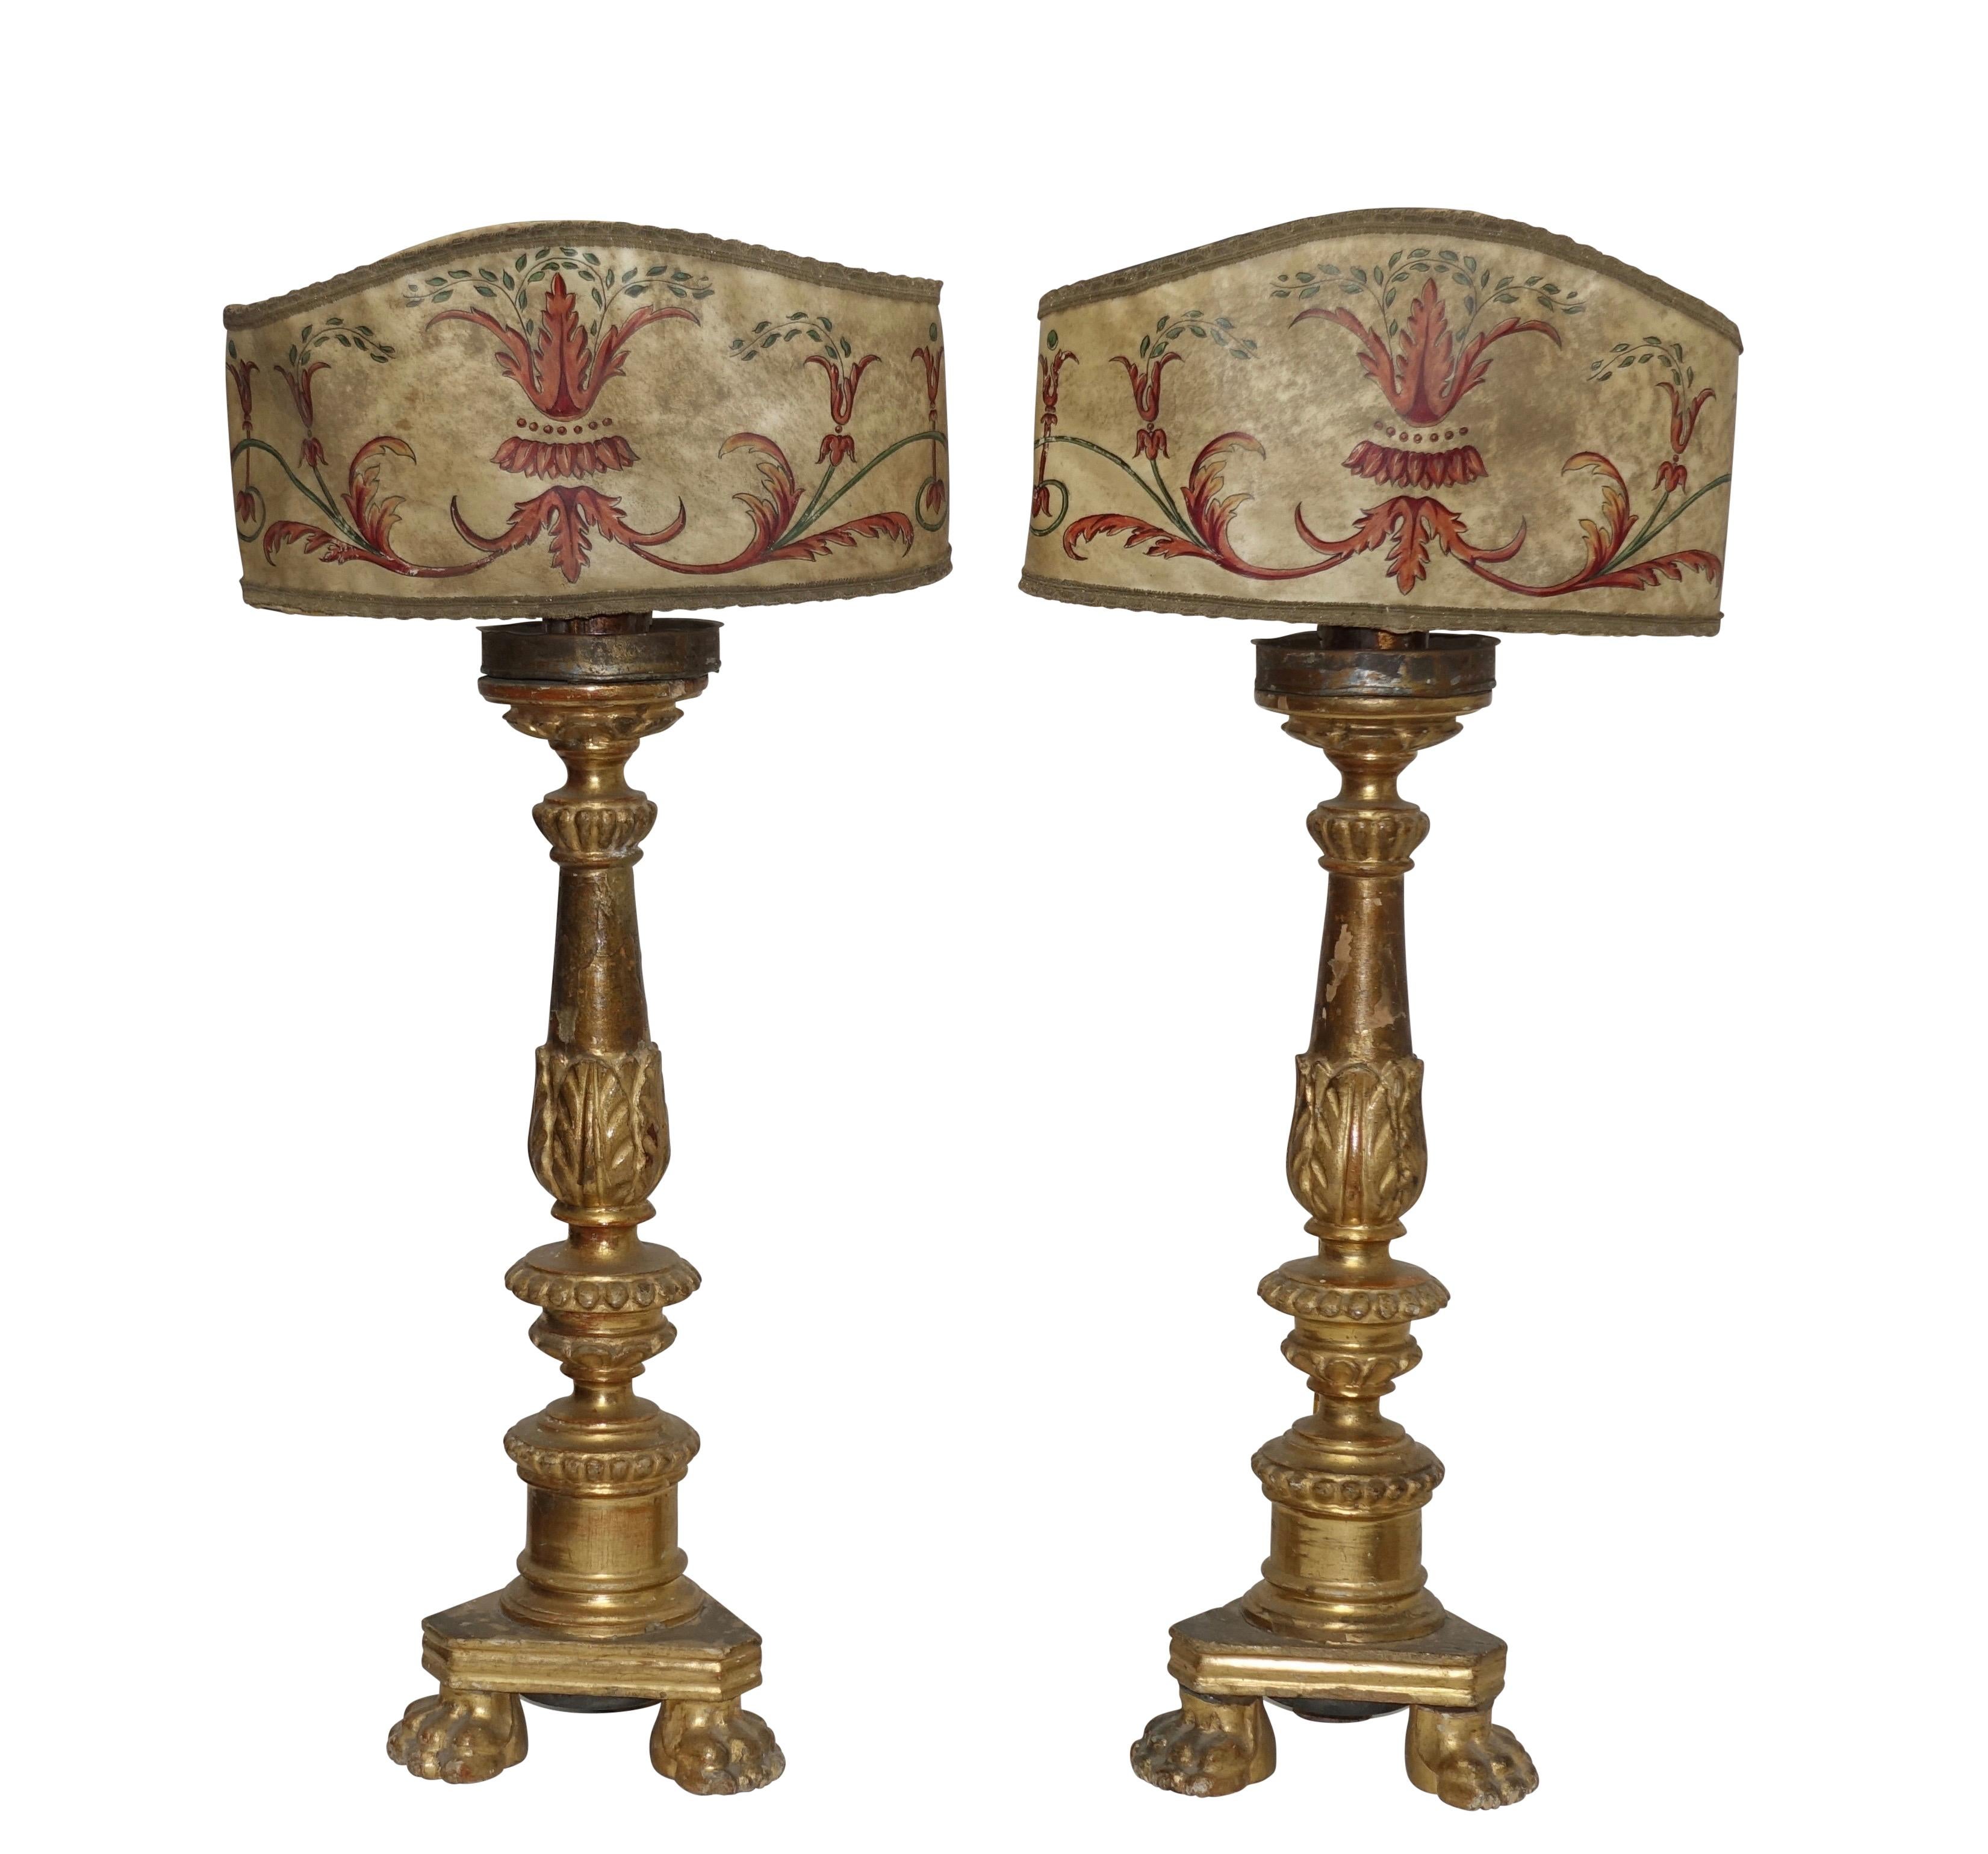 Carved Pair of Gilt Candlestick Lamps with Parchment Shades, Italian, 18th Century